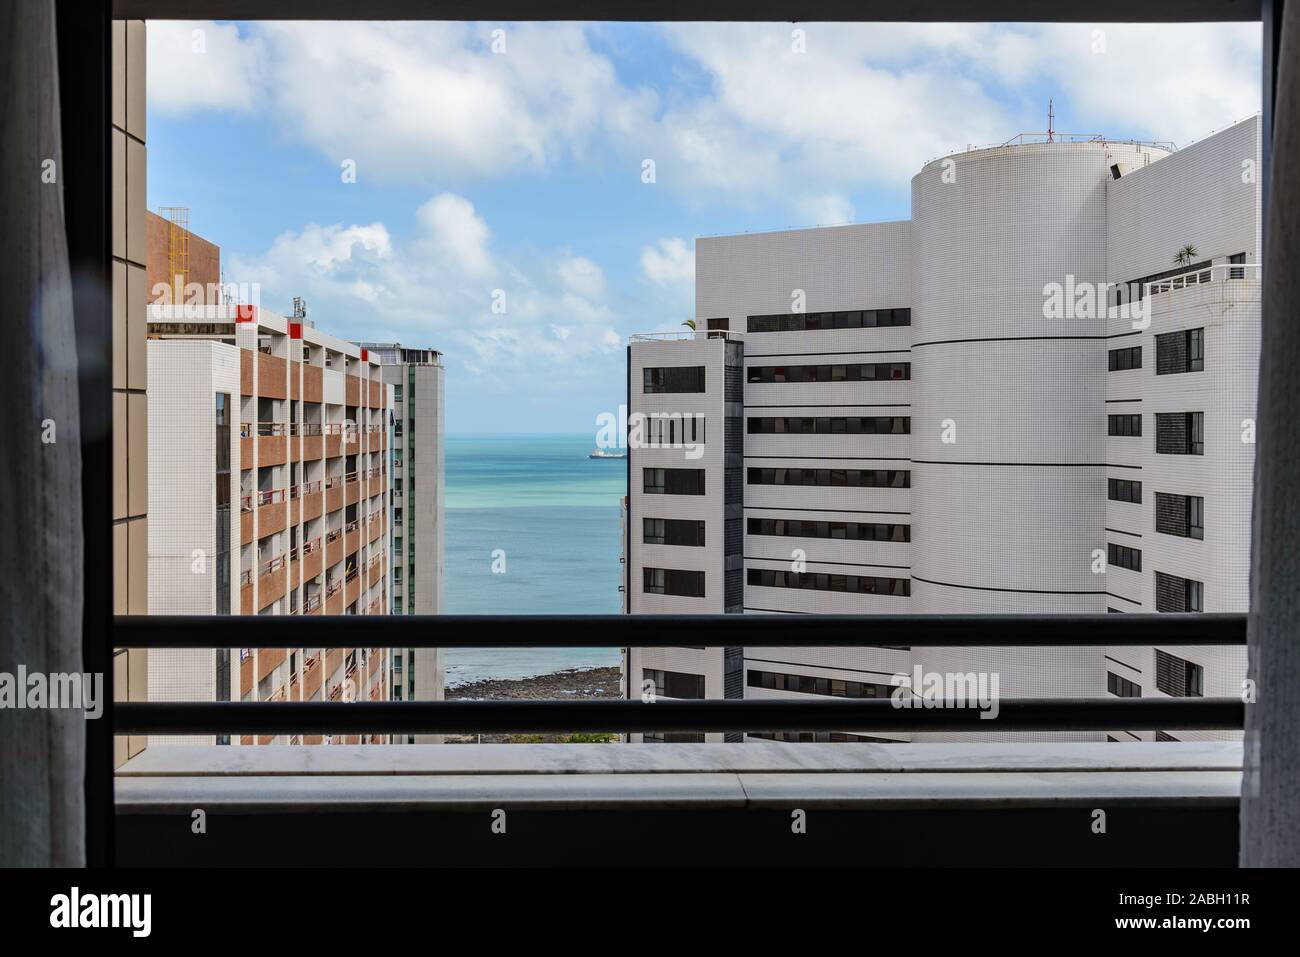 View of highrise buildings from a window. Fortaleza, Ceara, Brazil, South America. Stock Photo